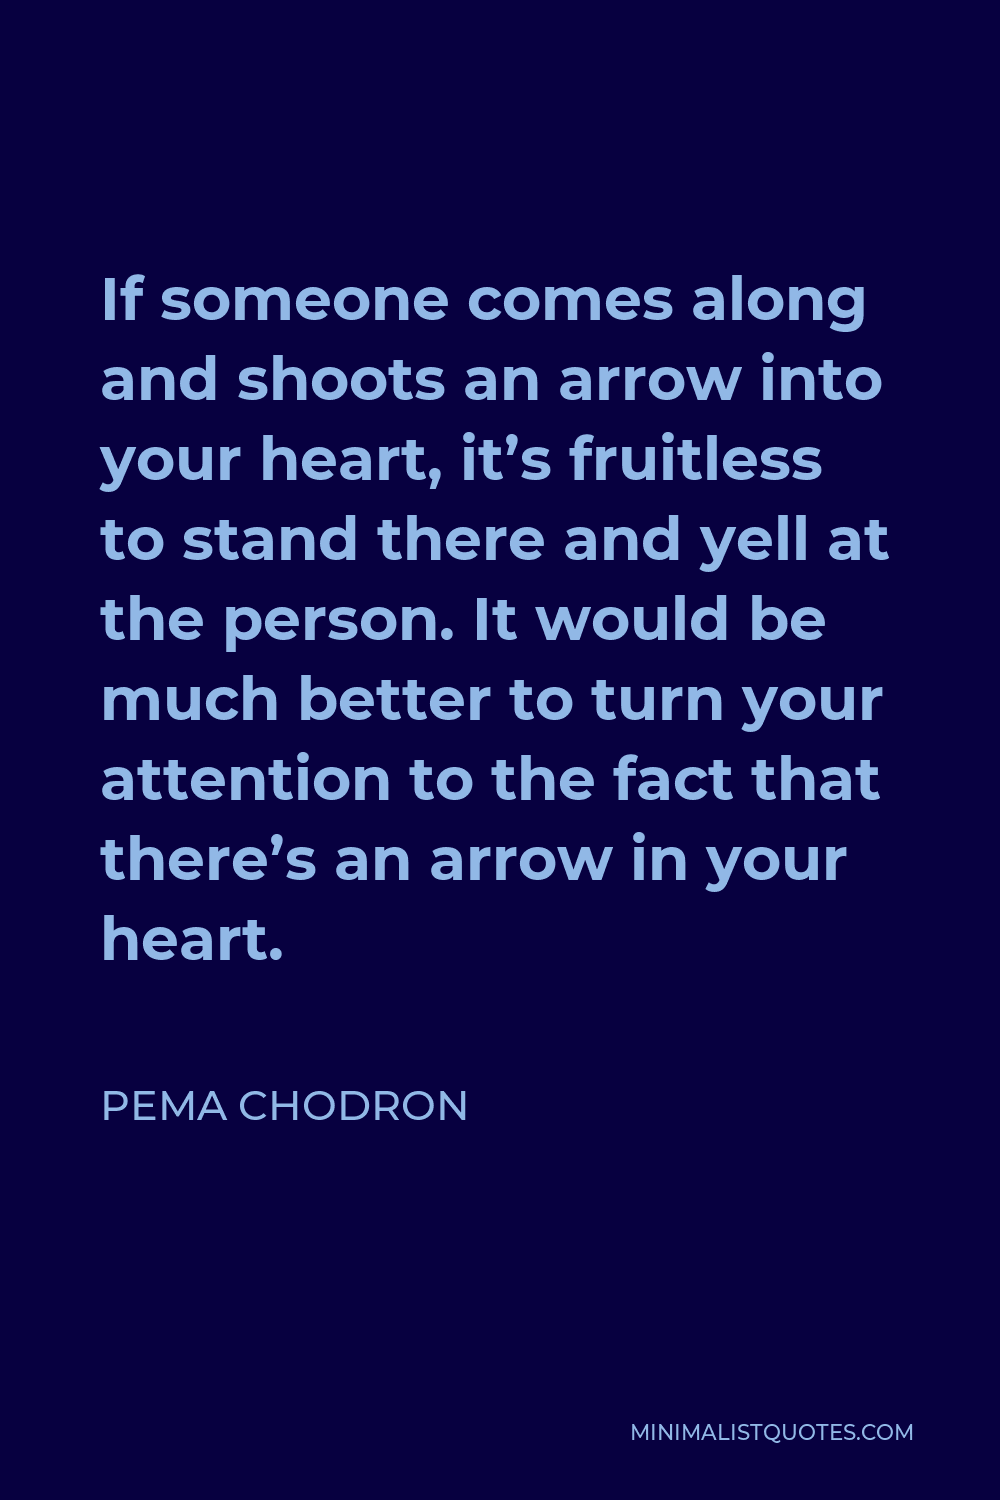 Pema Chodron Quote - If someone comes along and shoots an arrow into your heart, it’s fruitless to stand there and yell at the person. It would be much better to turn your attention to the fact that there’s an arrow in your heart.